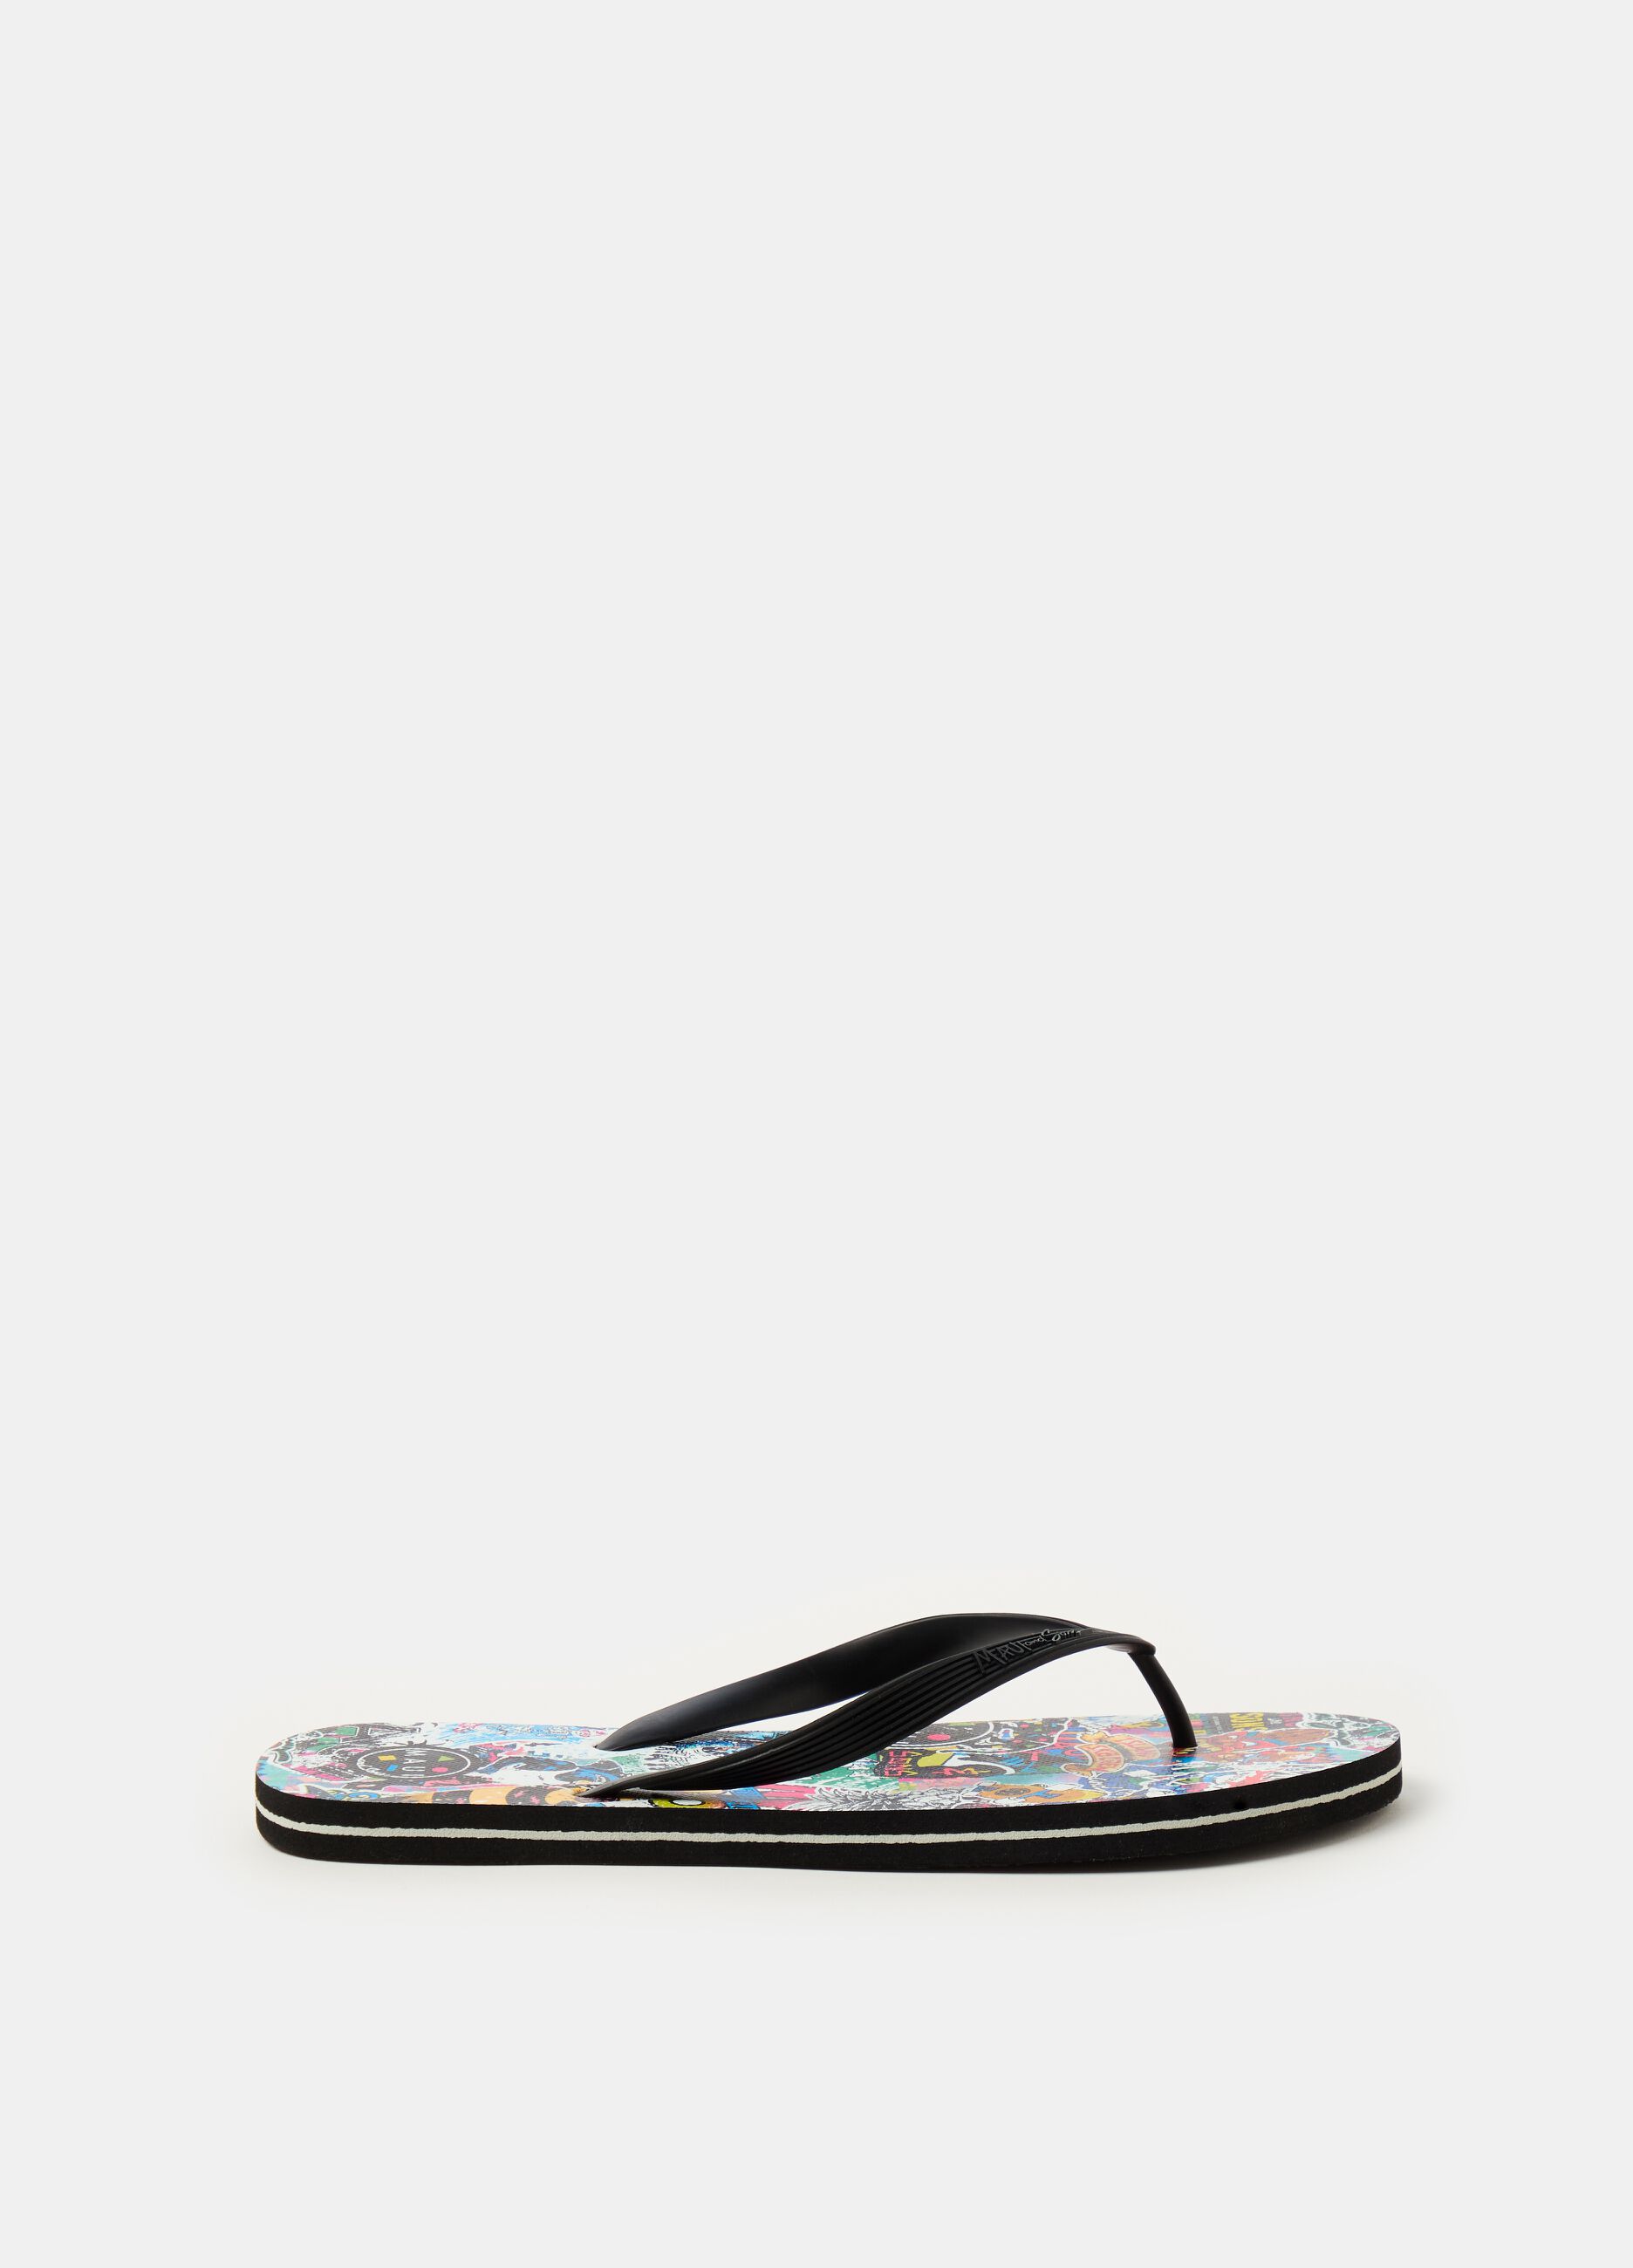 Thong sandals with graffiti-style print